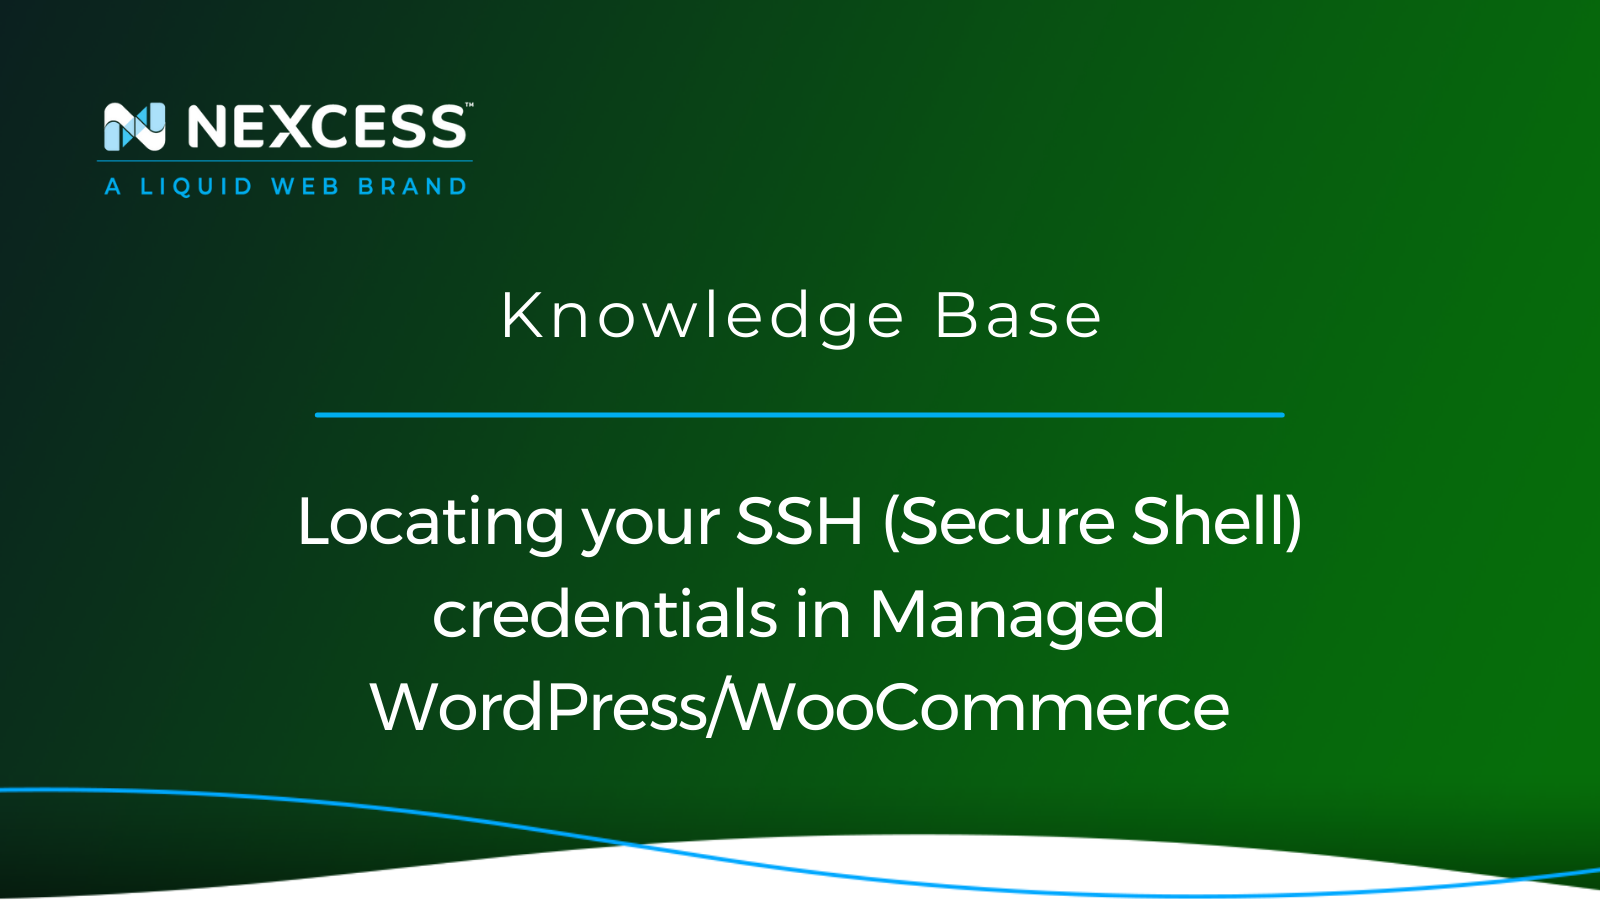 Locating your SSH (Secure Shell) credentials in Managed WordPress/WooCommerce